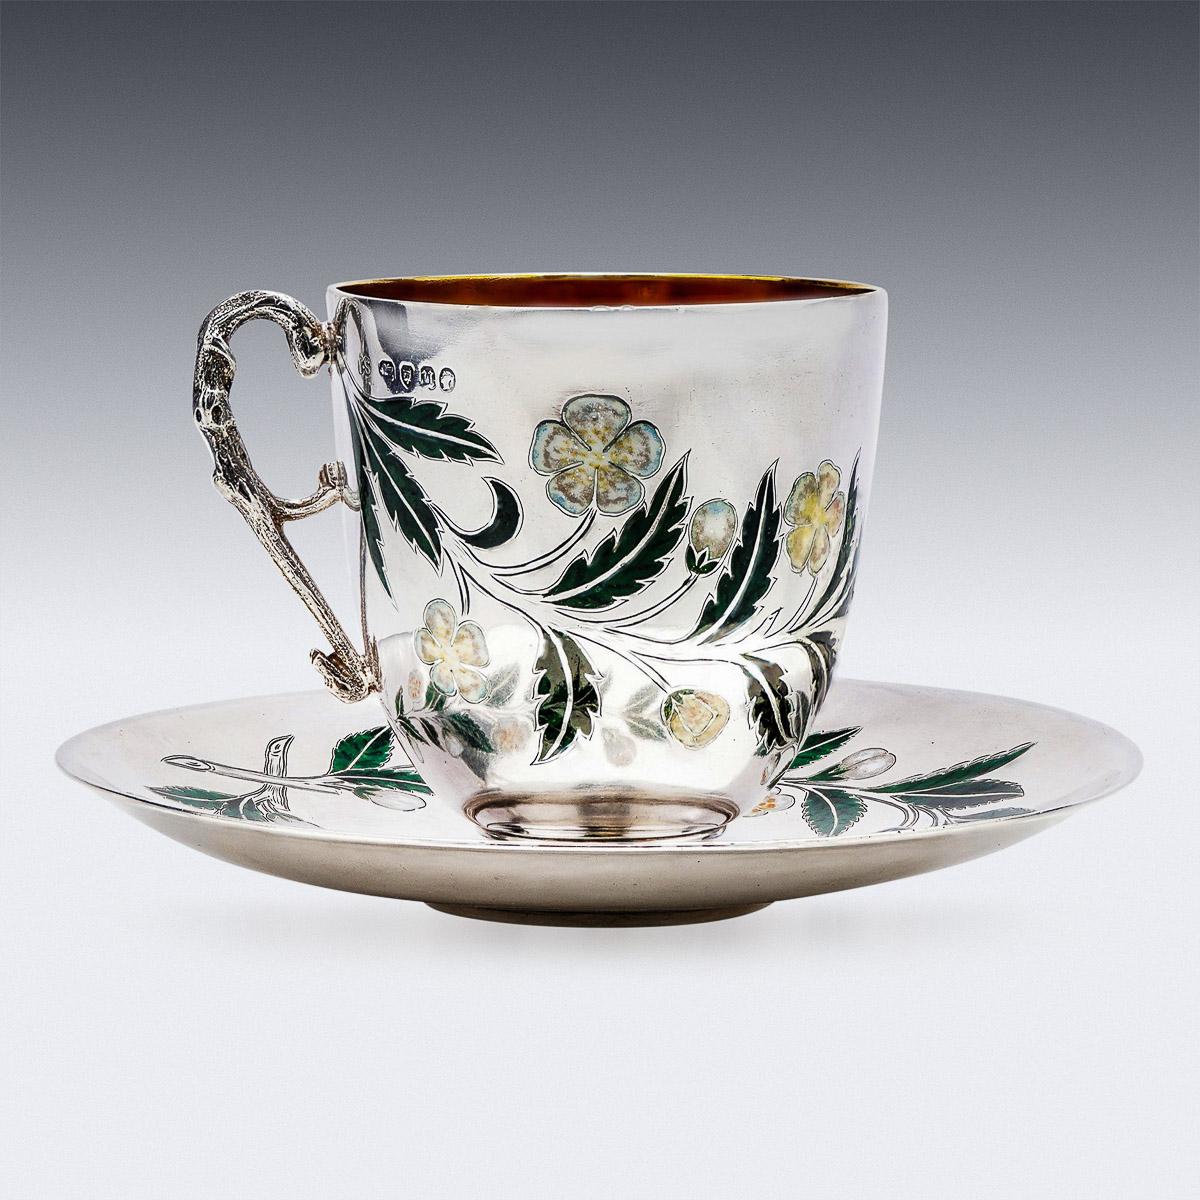 Antique 19th Century Victorian solid silver & champleve enamel tea cup and saucer, circular shaped and applied with shaped handle, plain rim and spreading domed foot, body decorated with flowers and foliage, exquisite quality and impeccable use of